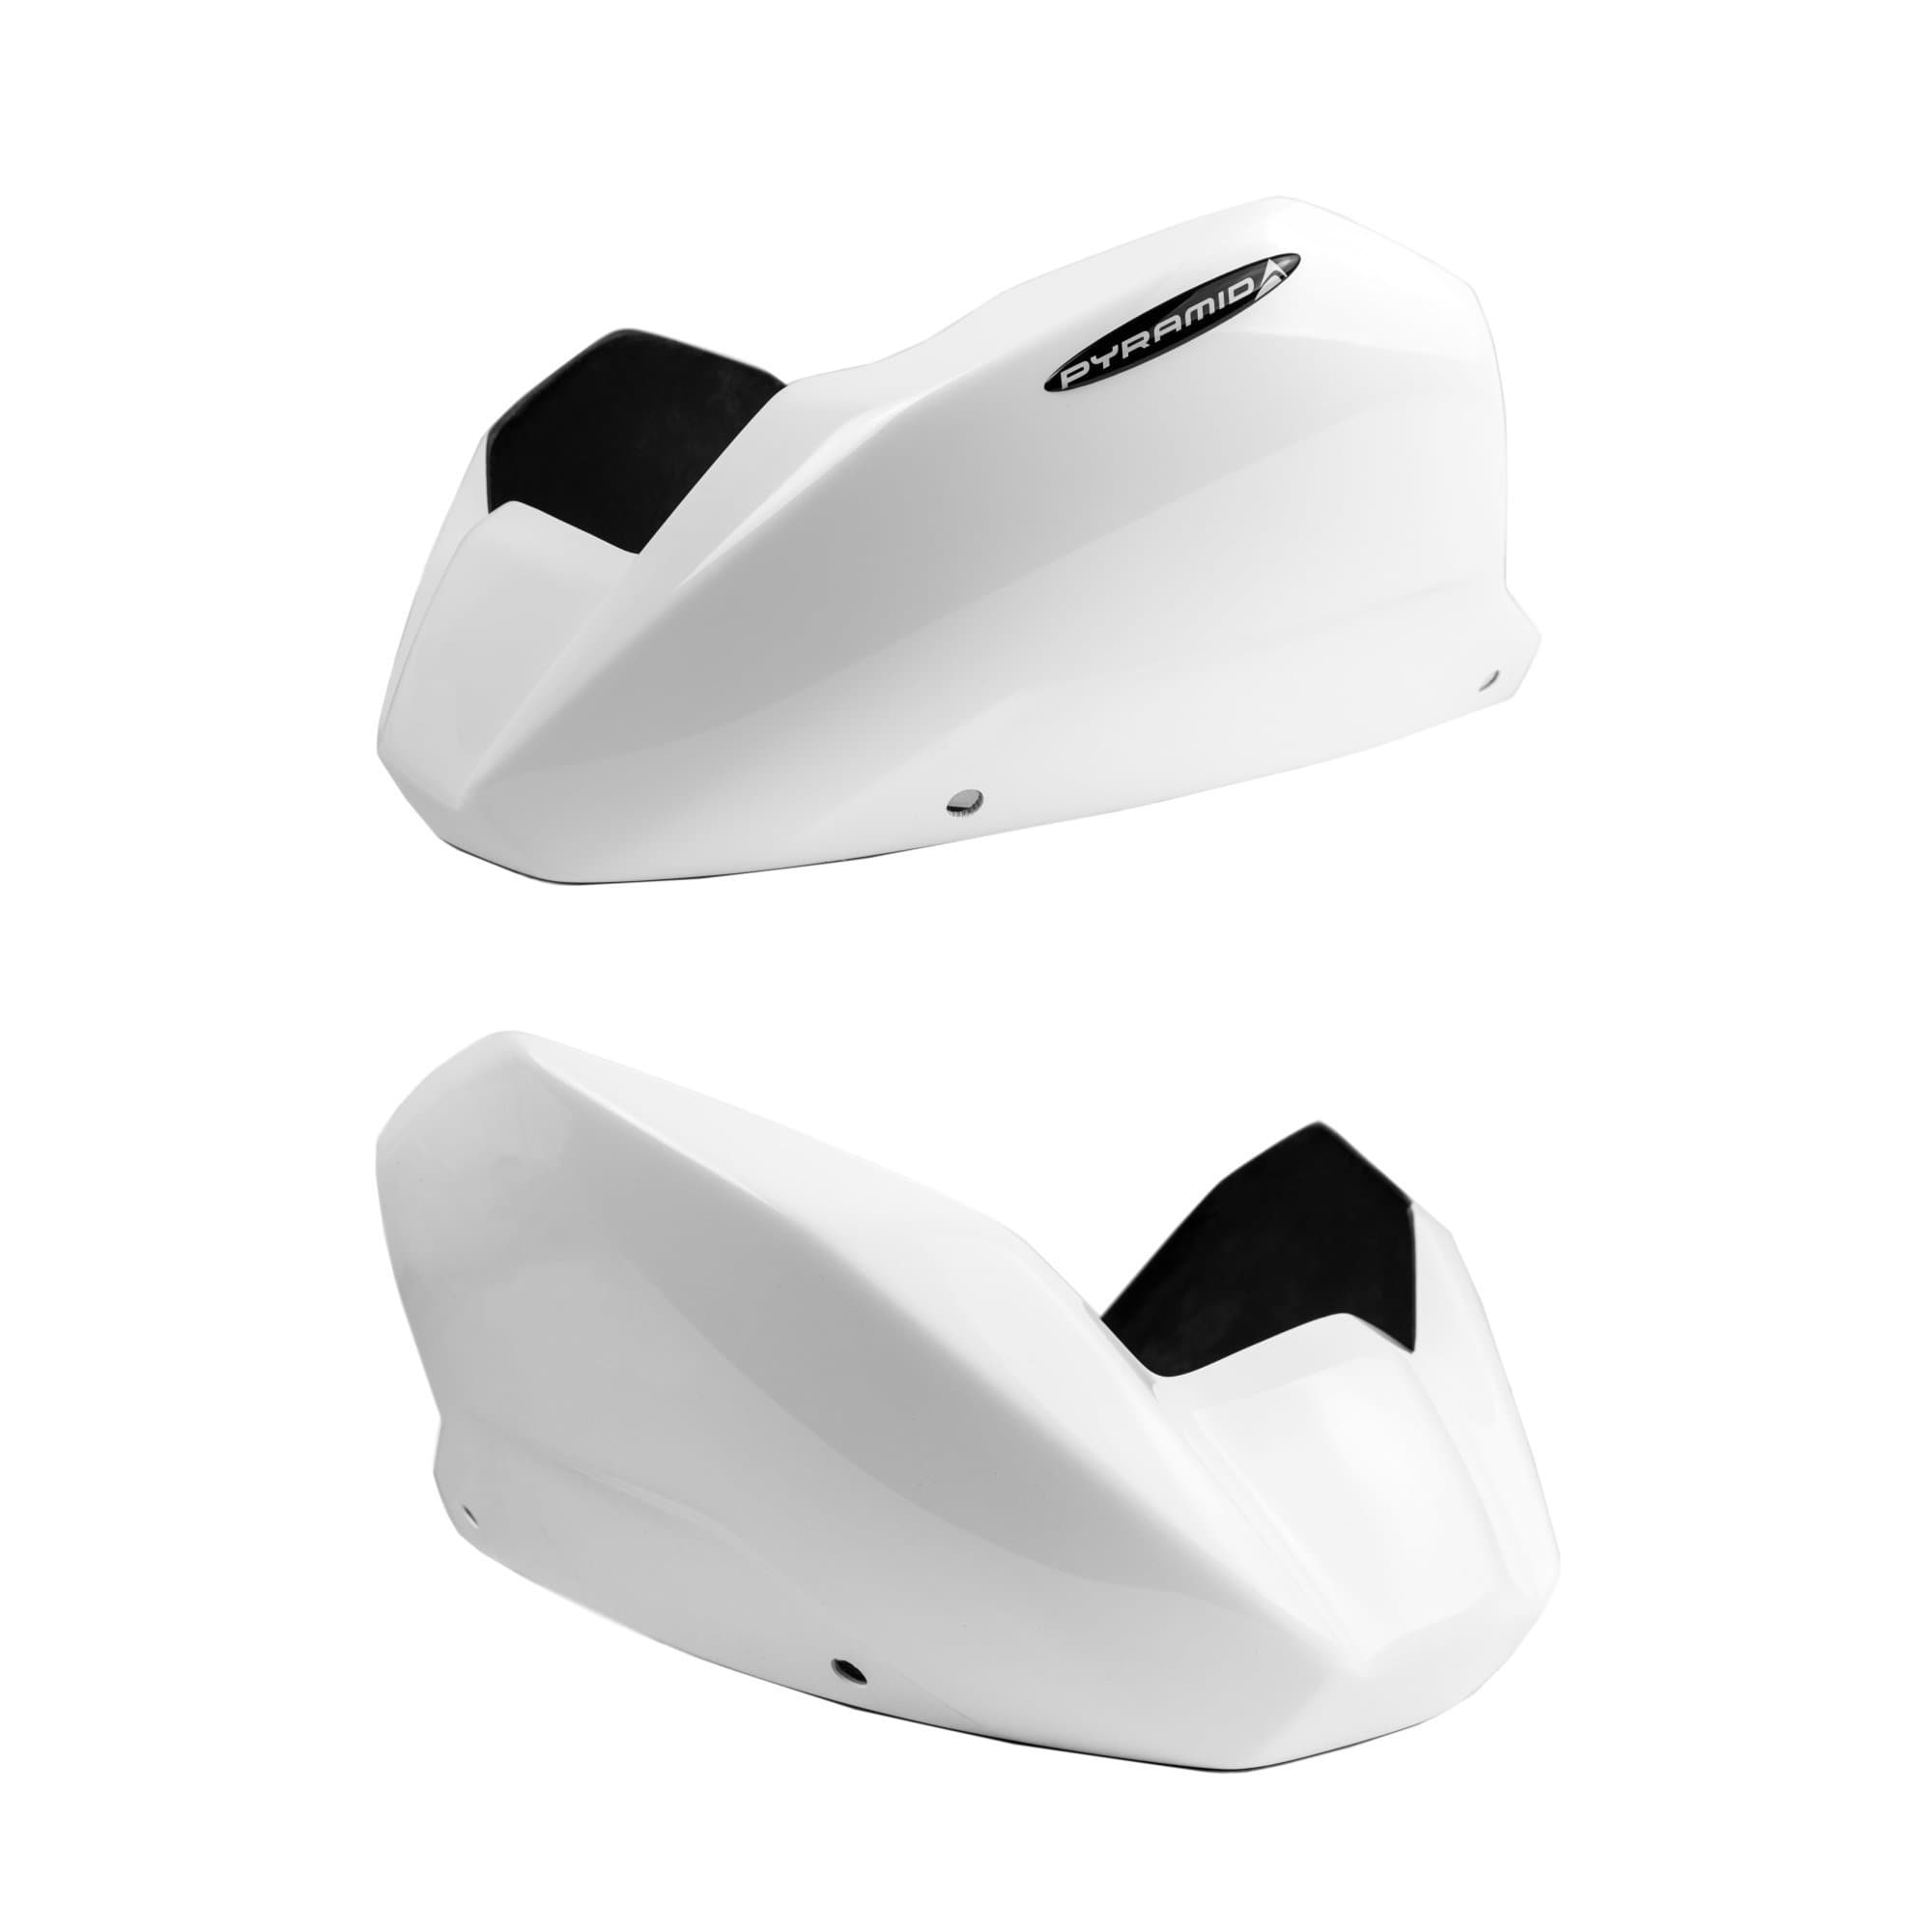 Pyramid Belly Pan | Gloss White | Yamaha FZ1 2006>2014-22117C-Belly Pans-Pyramid Motorcycle Accessories